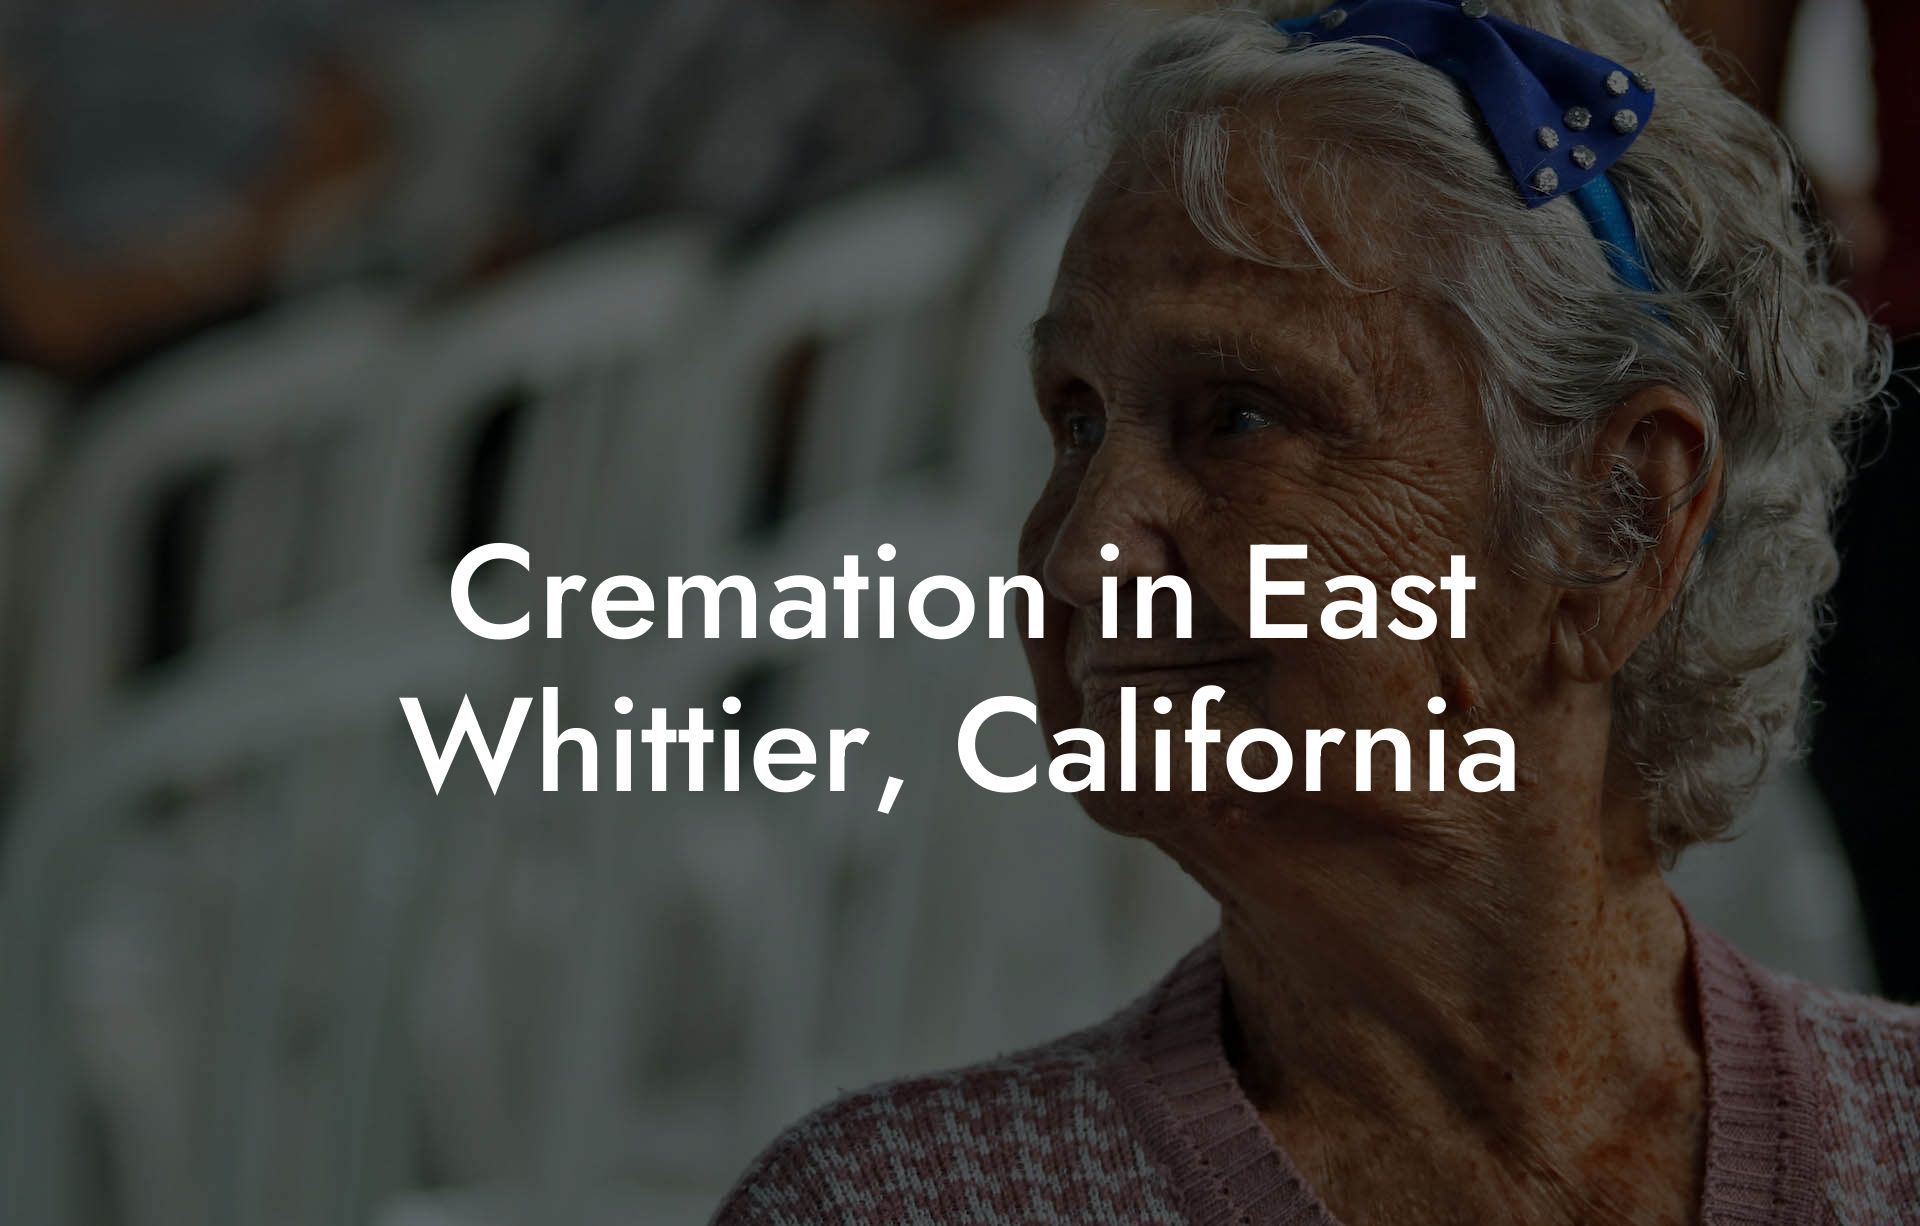 Cremation in East Whittier, California